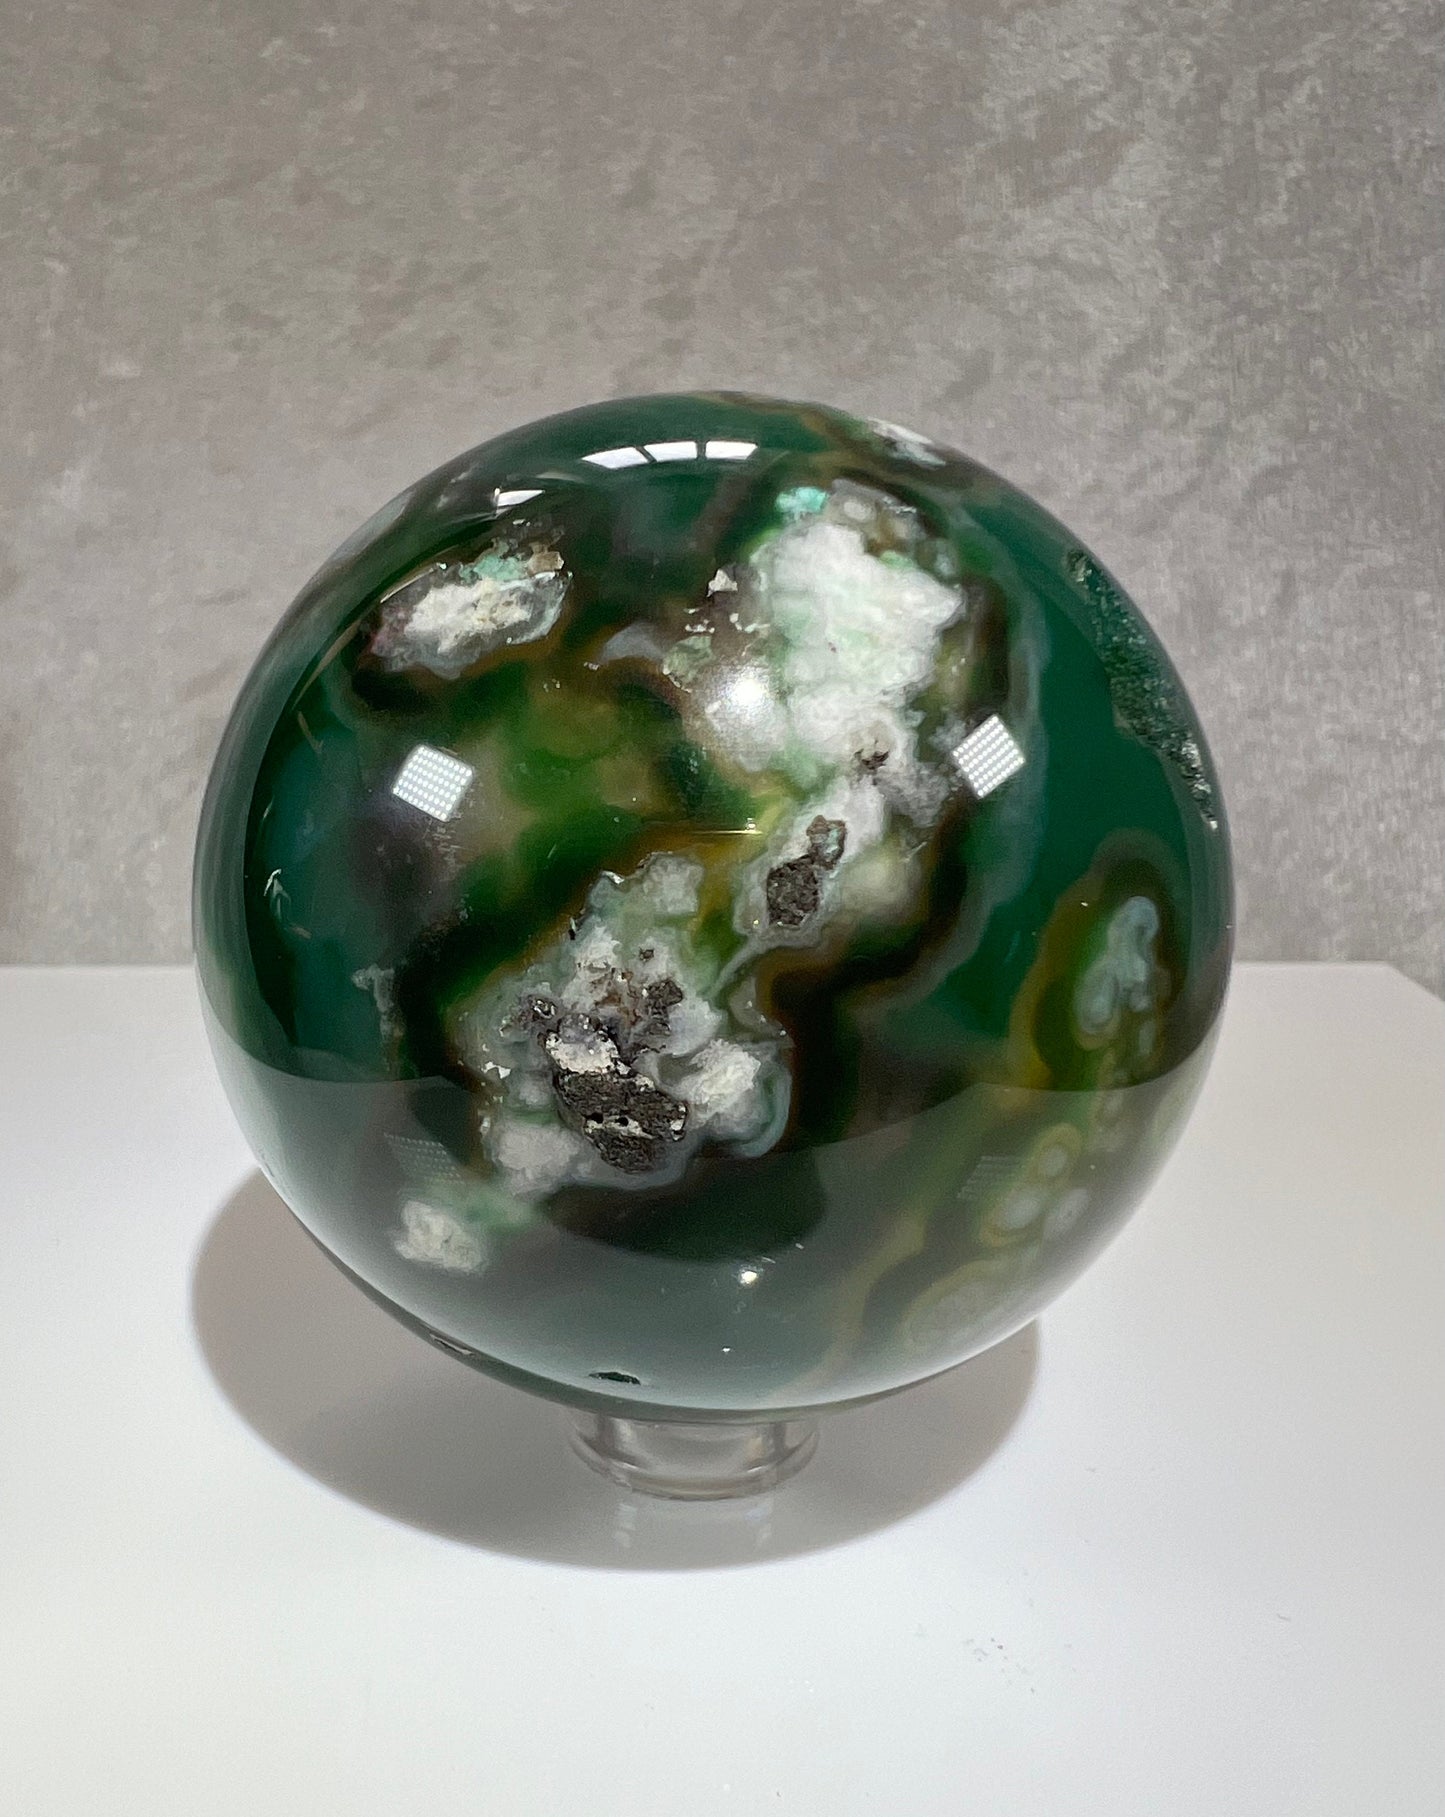 Stunning Green And Black Flower Agate Sphere. Awesome Sugar Druzy. Beautiful Color Combination With Green And Black.